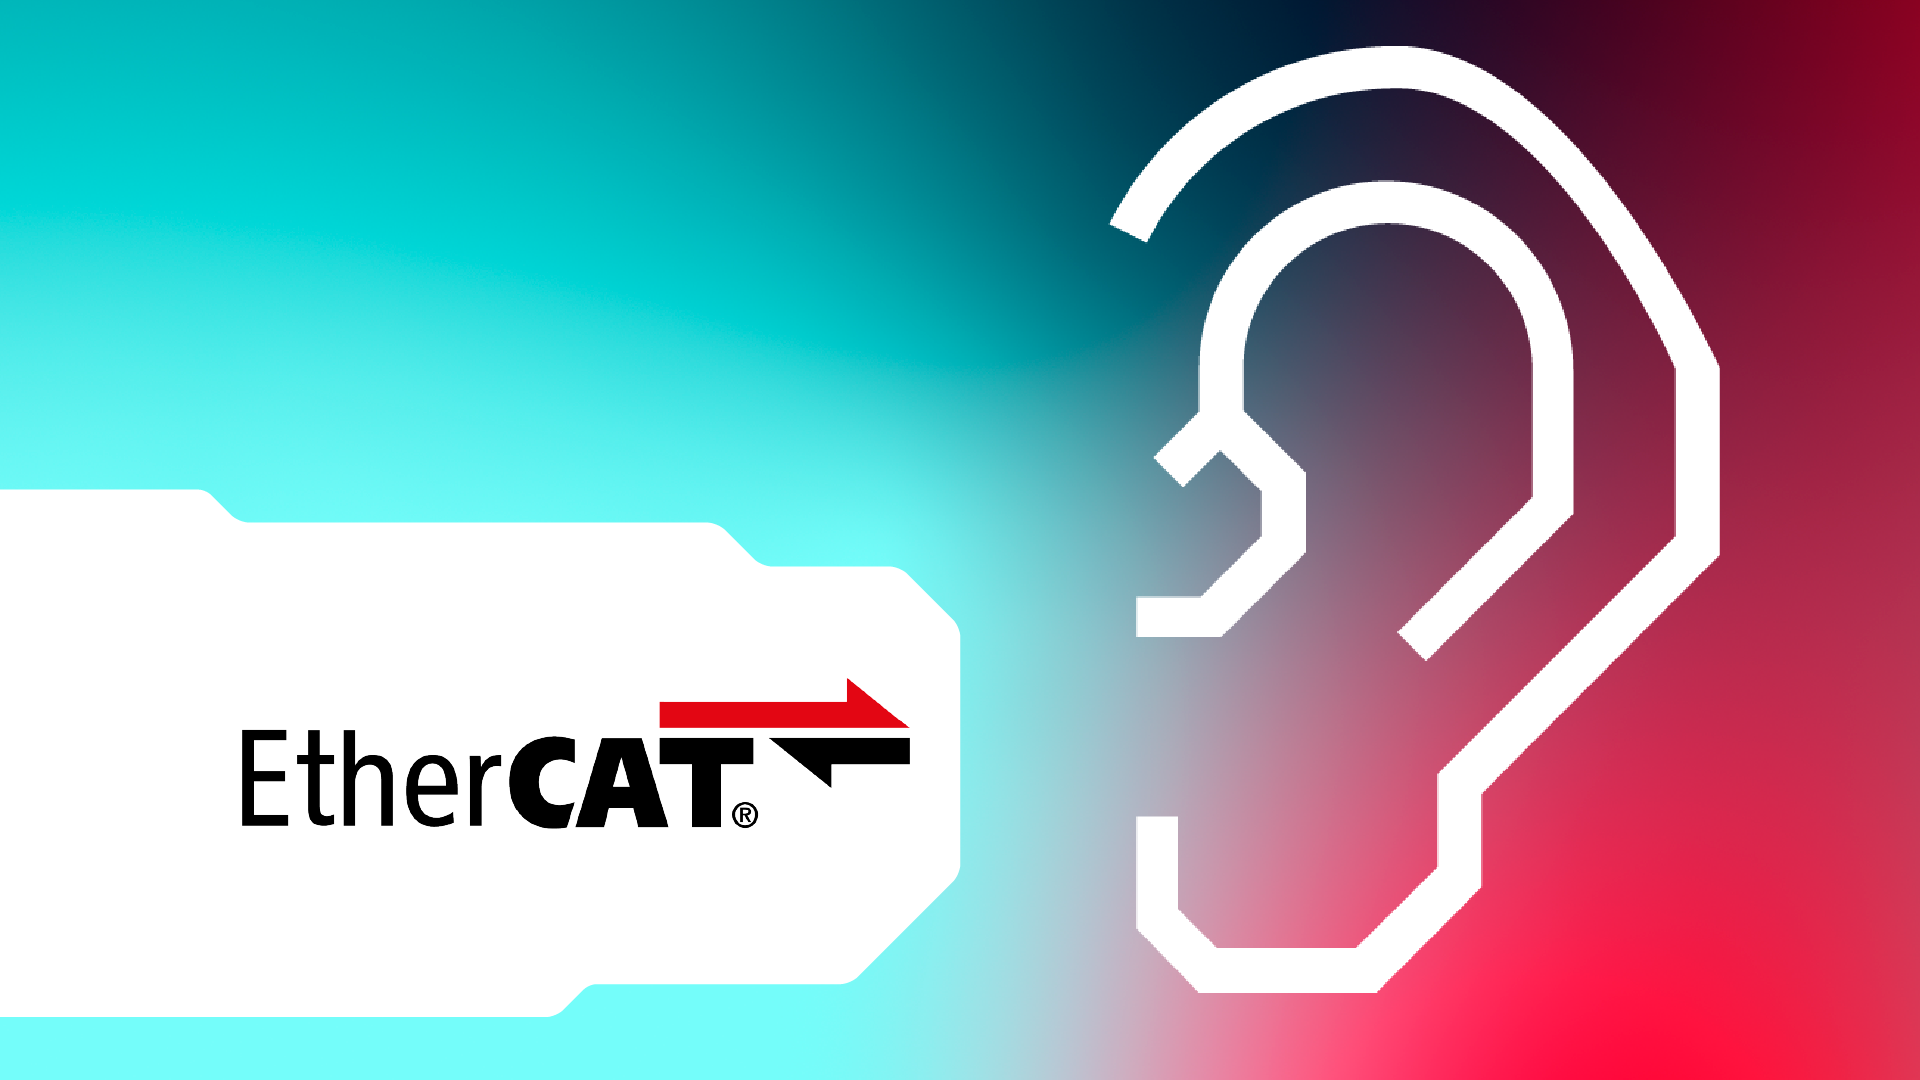 A stylized ear on a colourful background. The EtherCAT logo can be seen on the left side.